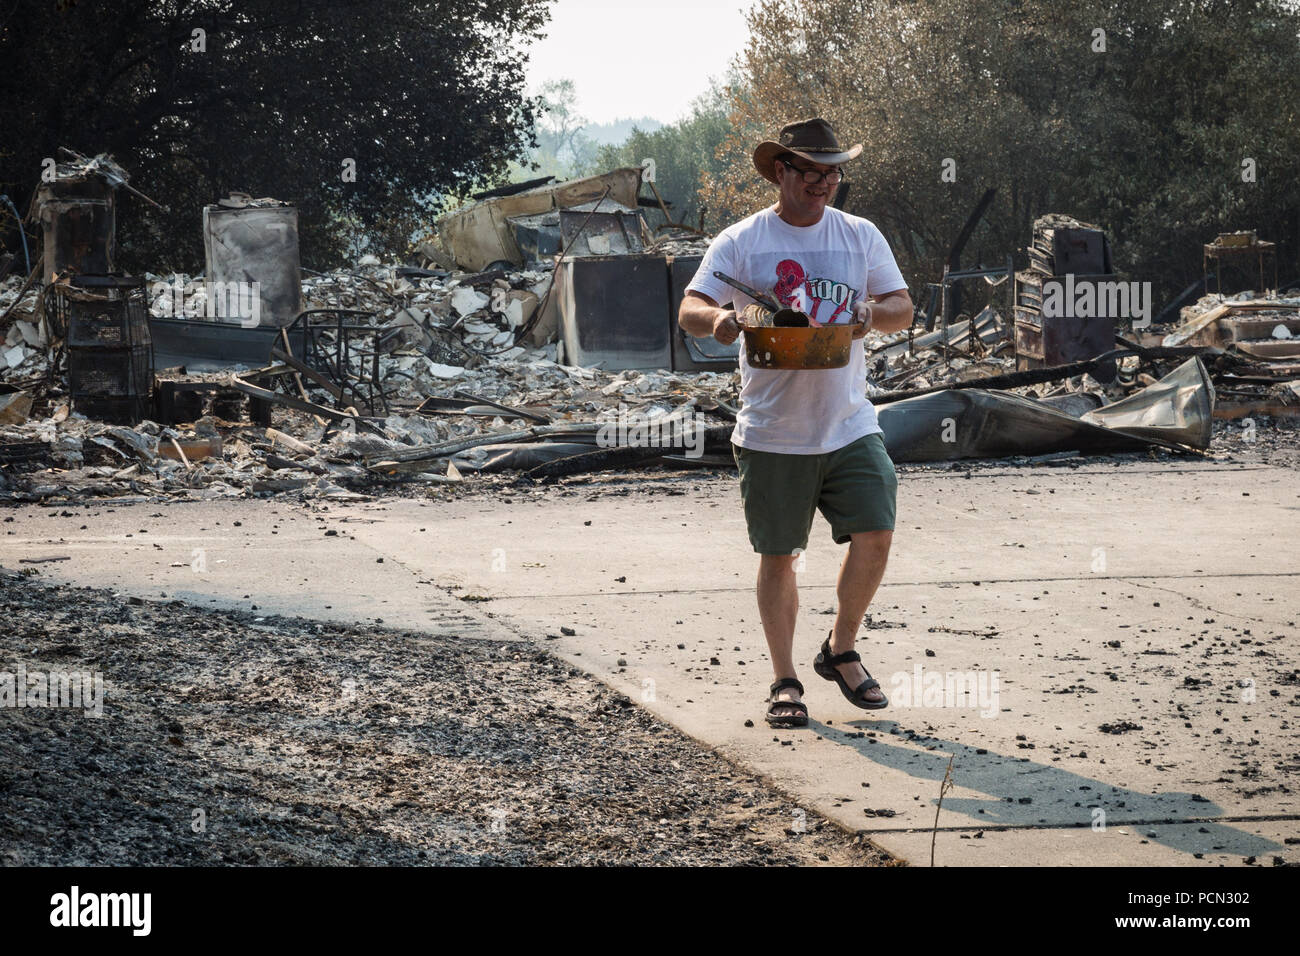 Redding, California, USA. 3rd Aug, 2018. ALISTAIR SULLIVAN pulls items, including a cooking pot, from the remnants of his home that burned in the Carr Fire. Sullivan, who has lived in the Lake Redding Estates area for approximately three years, remains optimistic. He's currently staying in a local hotel and has set up a fundraising page on Facebook to help defray some of the costs needed to rebuild. The Carr Fire has killed six people and destroyed more than a thousand homes and buildings since it raged through the area last week. Credit: Tracy Barbutes/ZUMA Wire/Alamy Live News Stock Photo